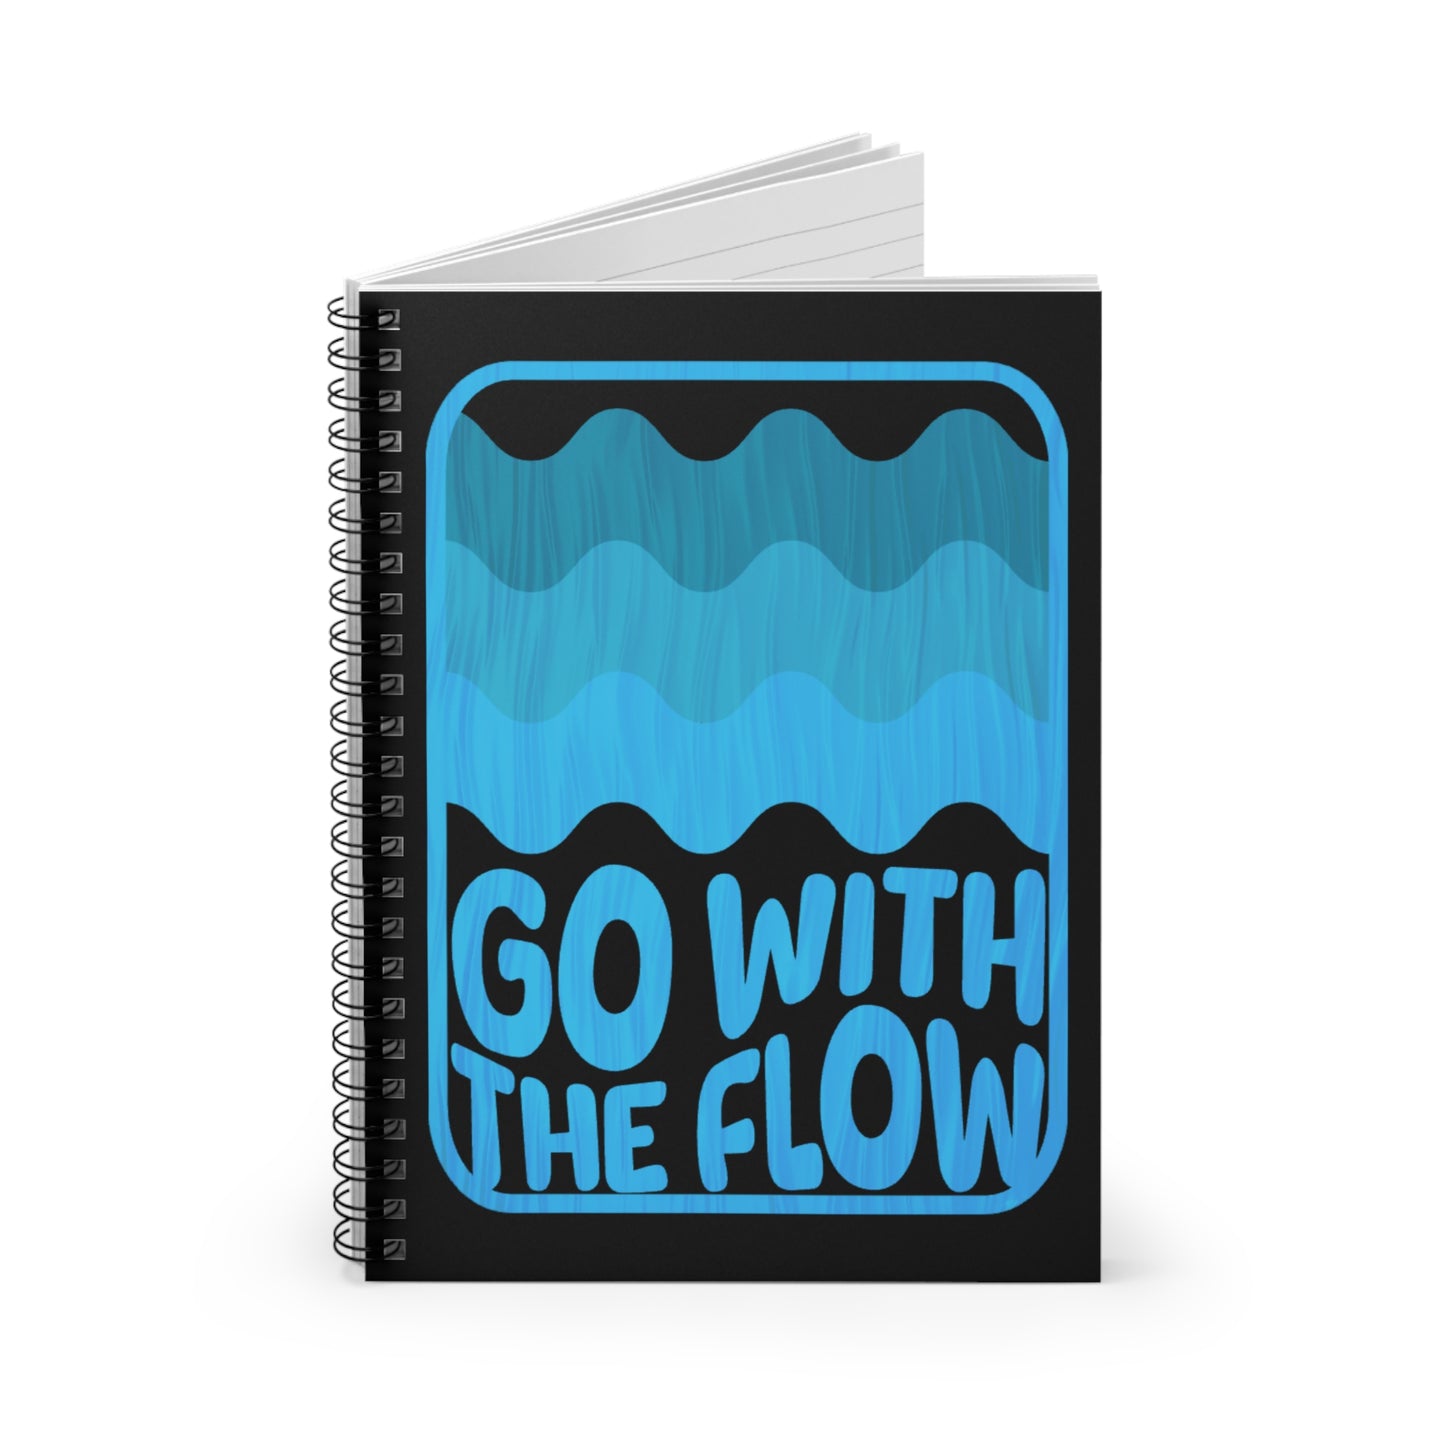 Go with the Flow | Spiral Notebook - Ruled Line